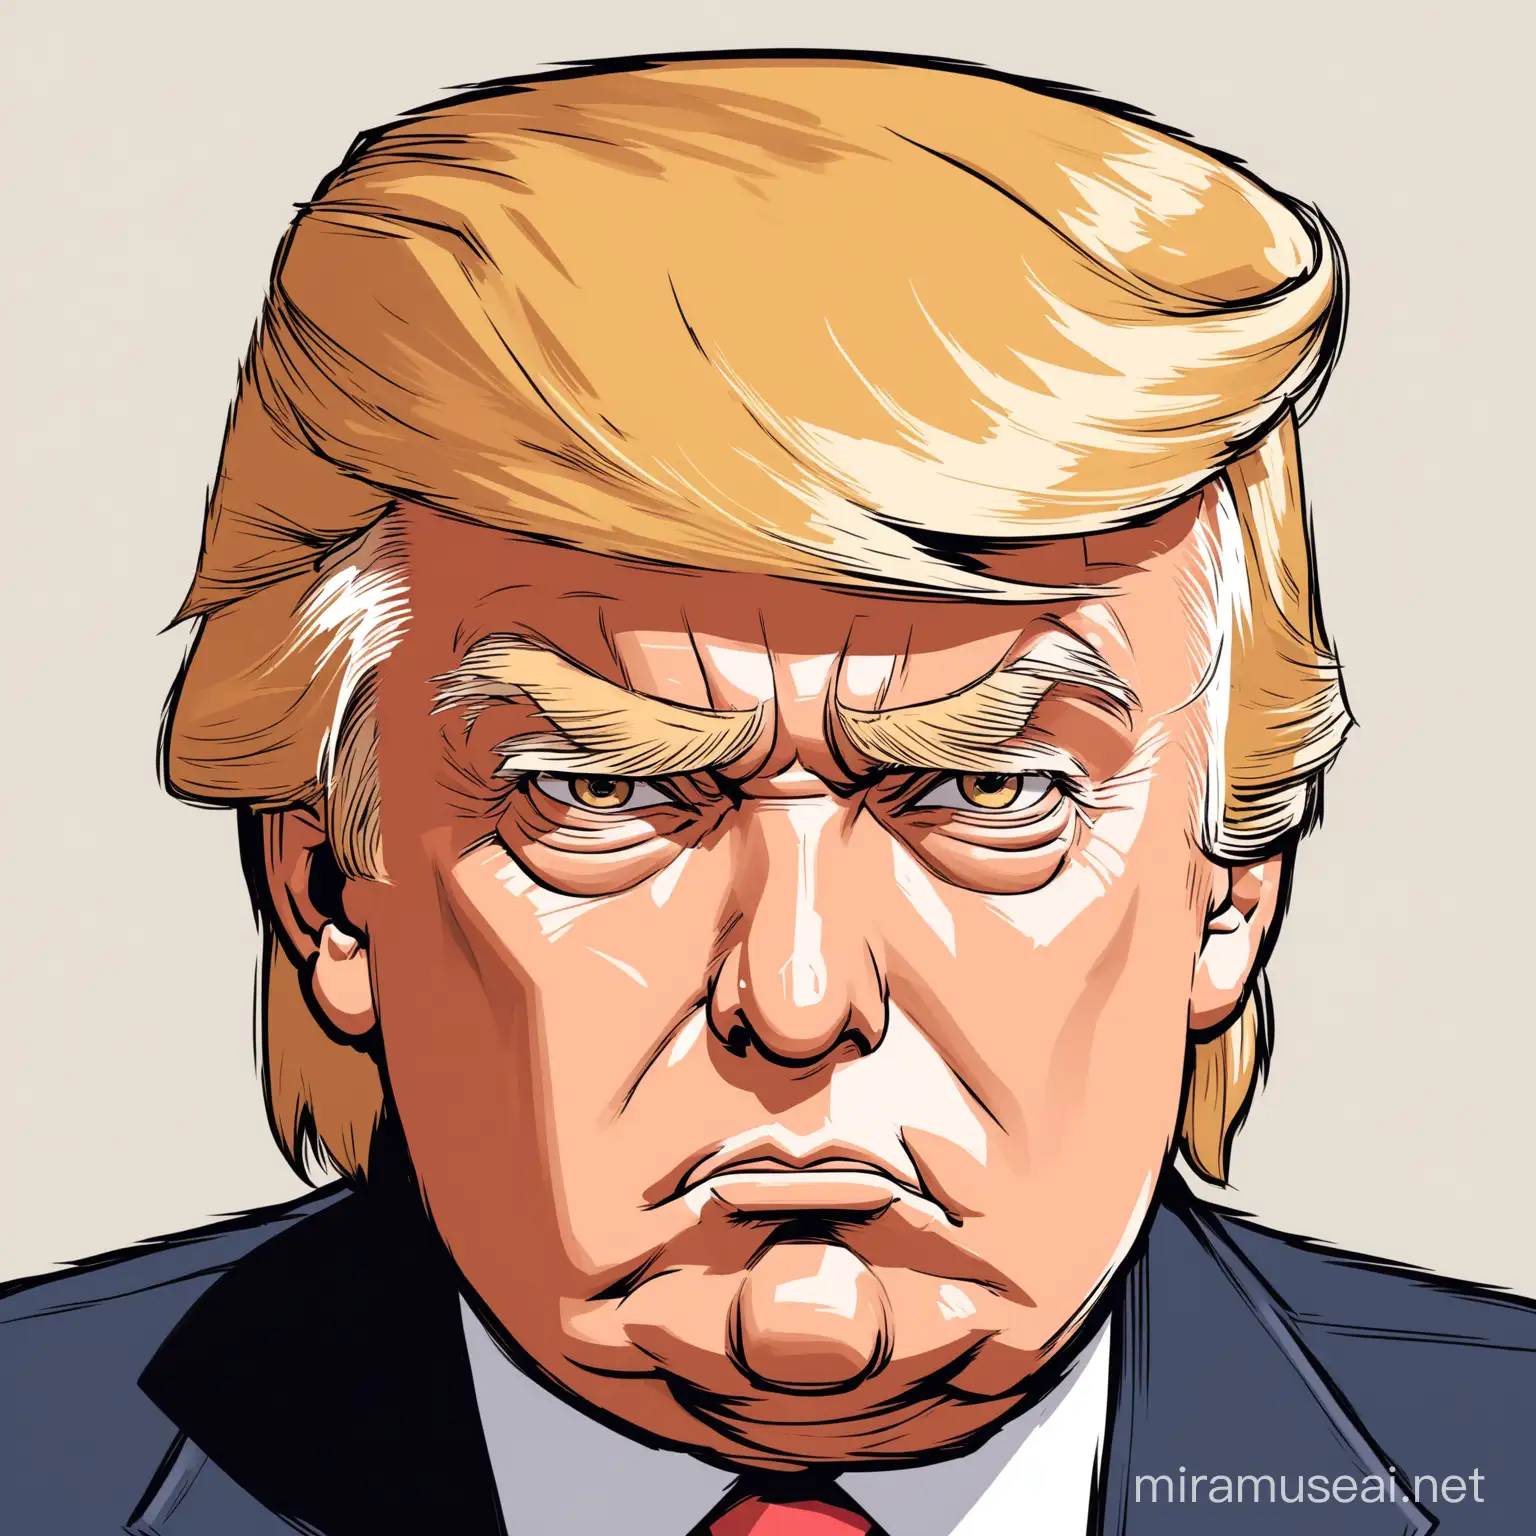 Cartoon Portrait of Donald Trump with Serious Expression